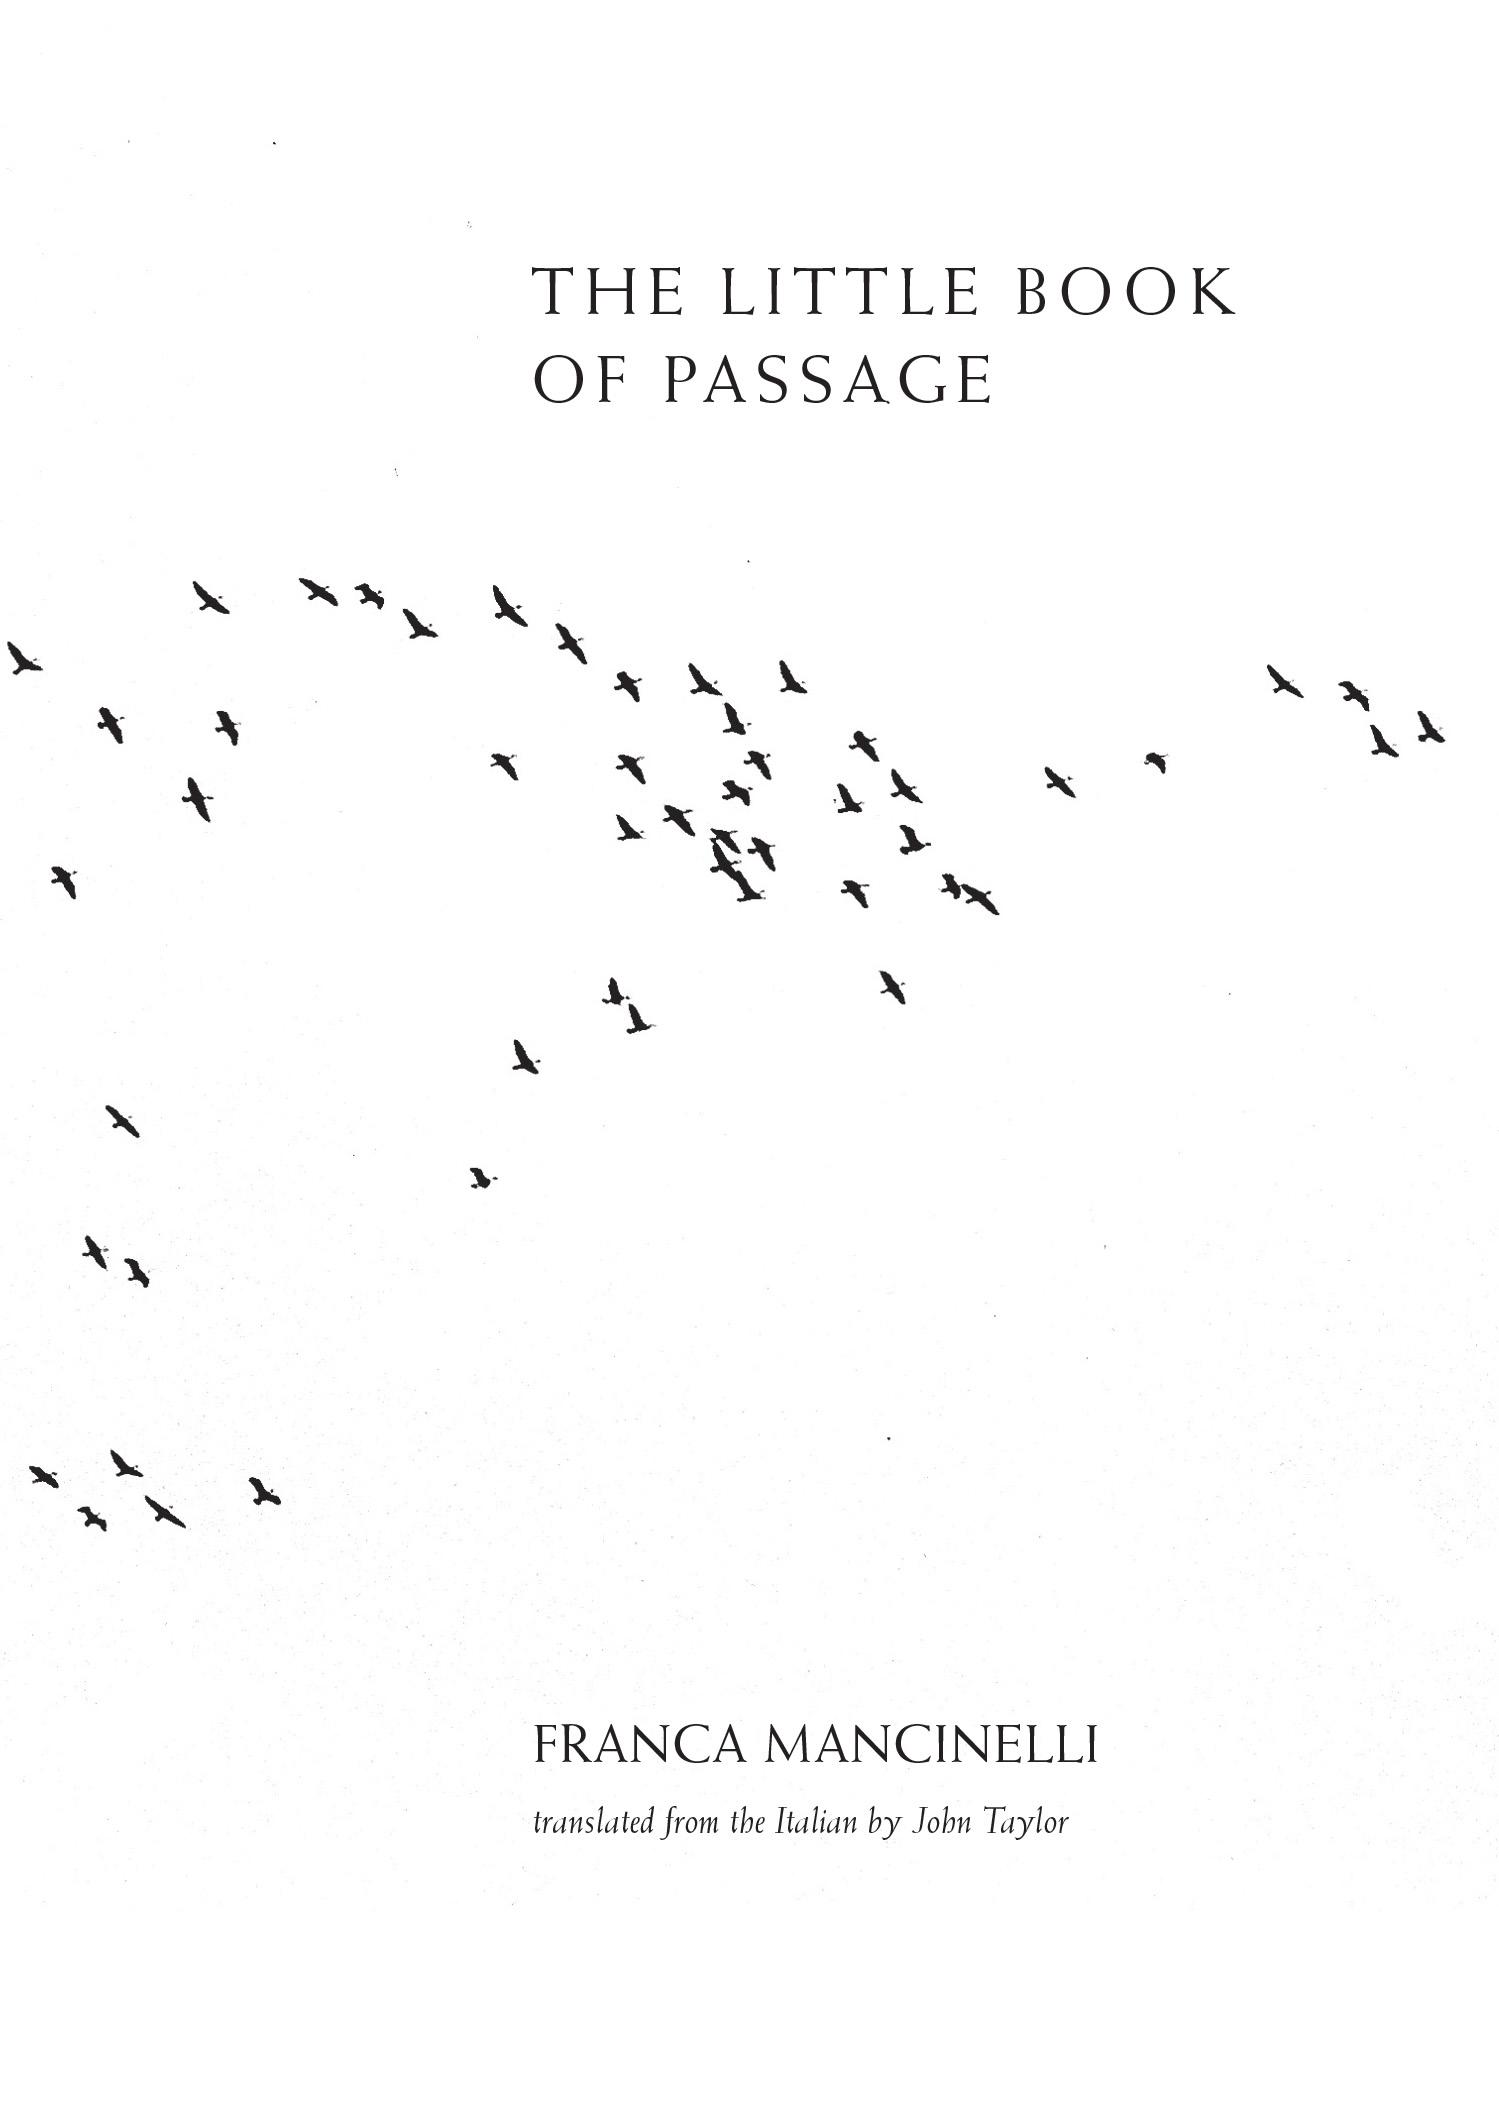 little book of passage by franca mancinelli